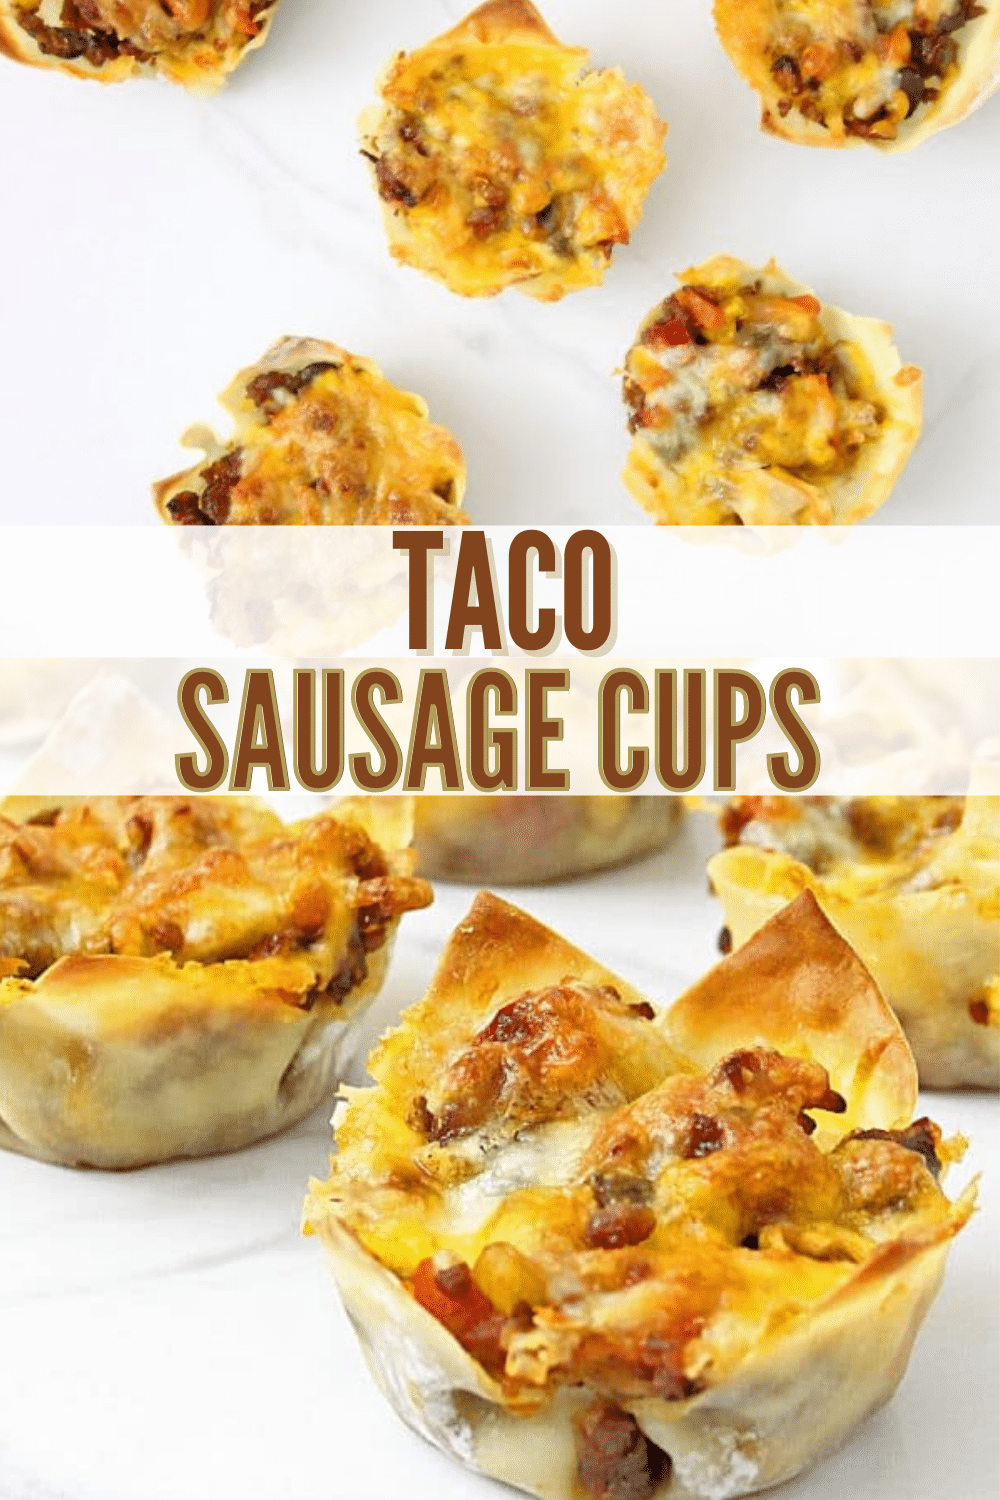 Easy Taco Sausage Cups make a great appetizer, finger food or even busy weeknight dinner. These appetizer cups are packed with meat and veggies. #sausage #appetizers #fingerfoods via @wondermomwannab